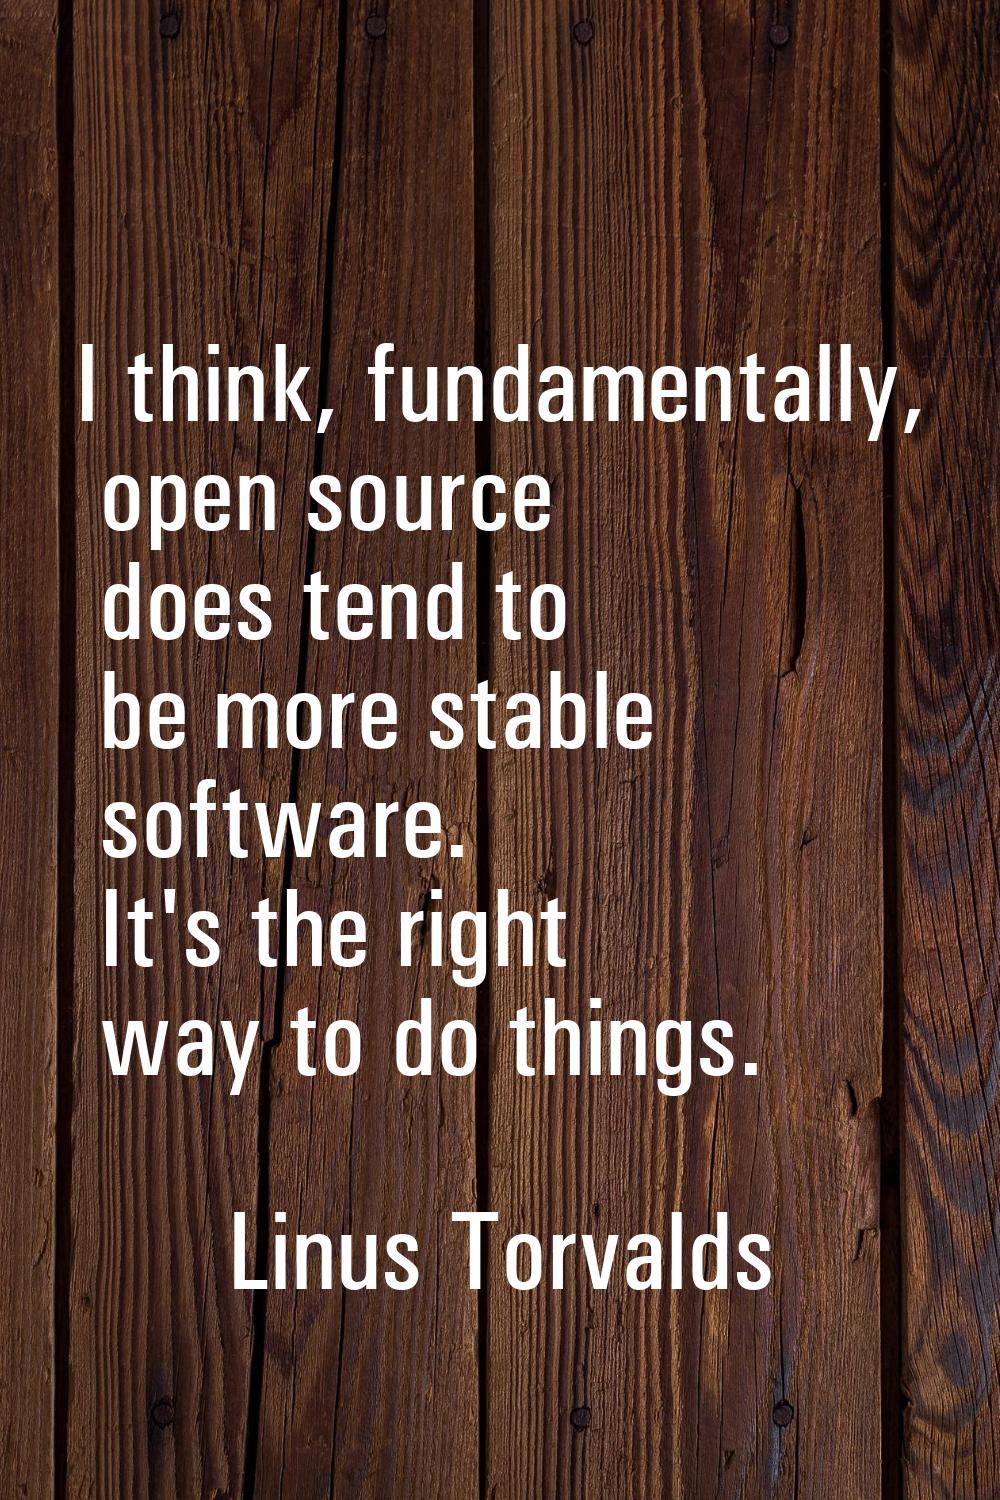 I think, fundamentally, open source does tend to be more stable software. It's the right way to do 